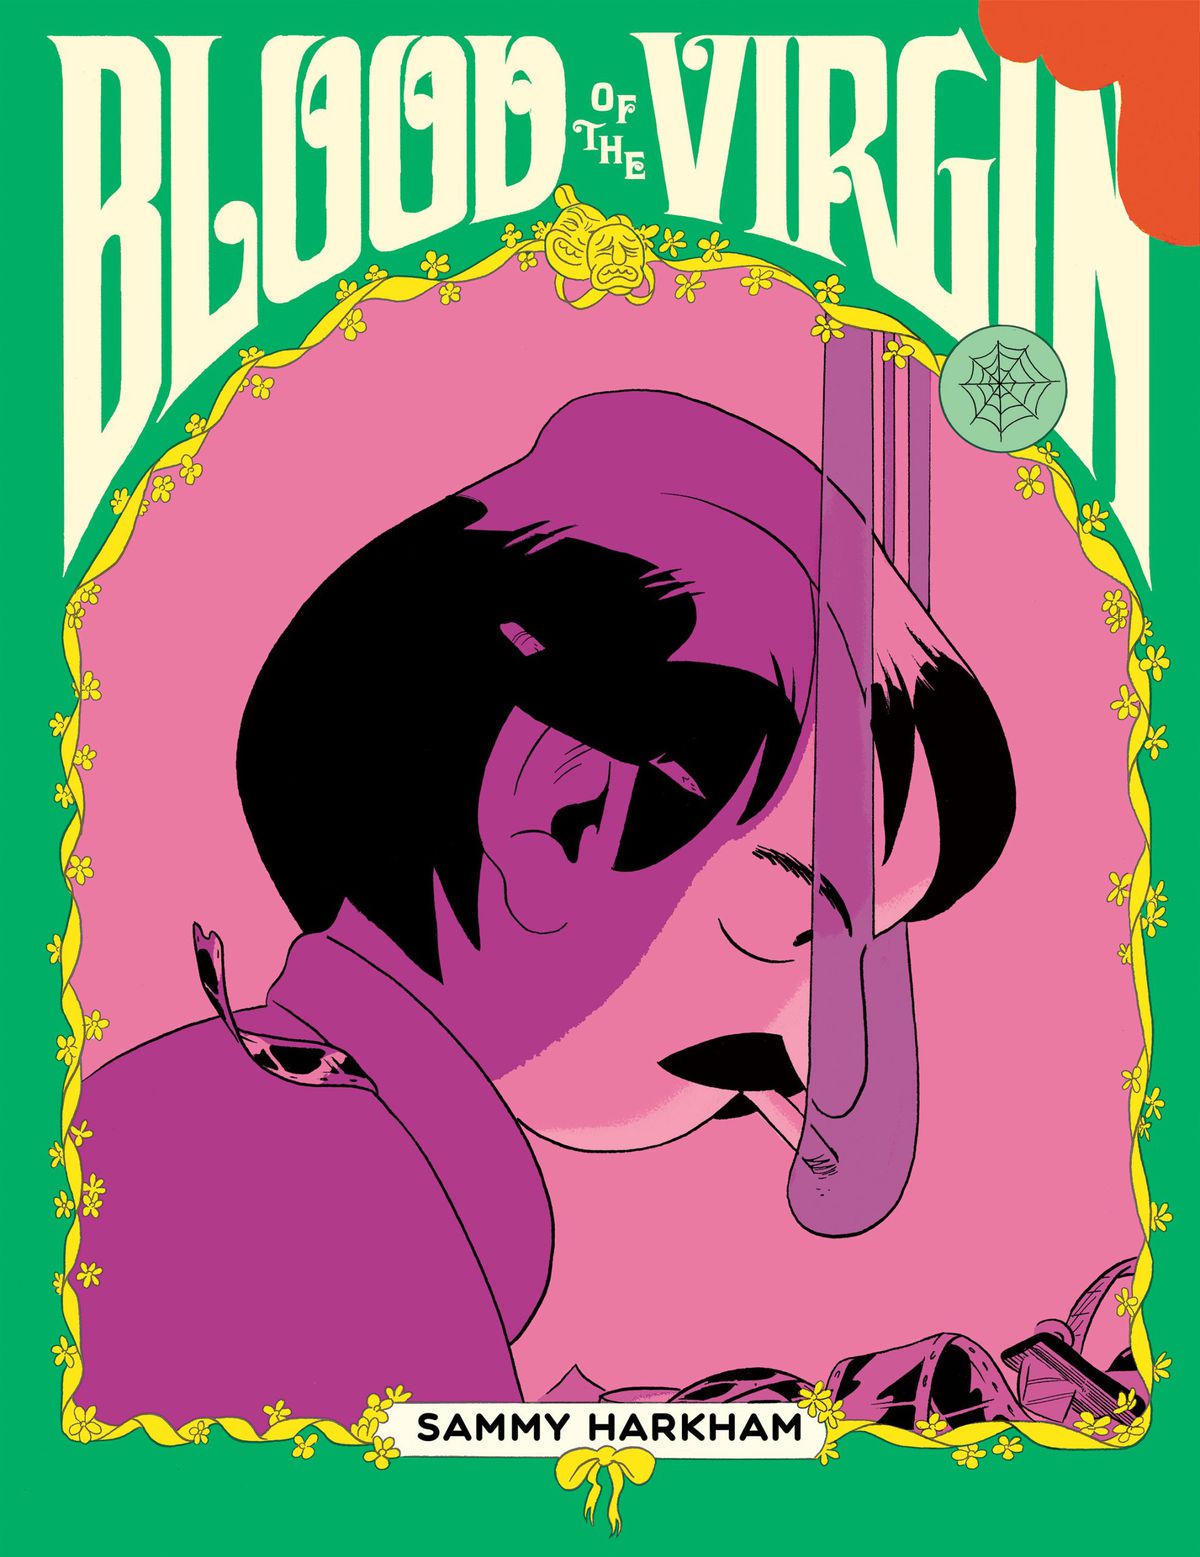 A brightly colored but monochrome image of a man smoking a cigarette on the cover of Blood of the Virgin. 